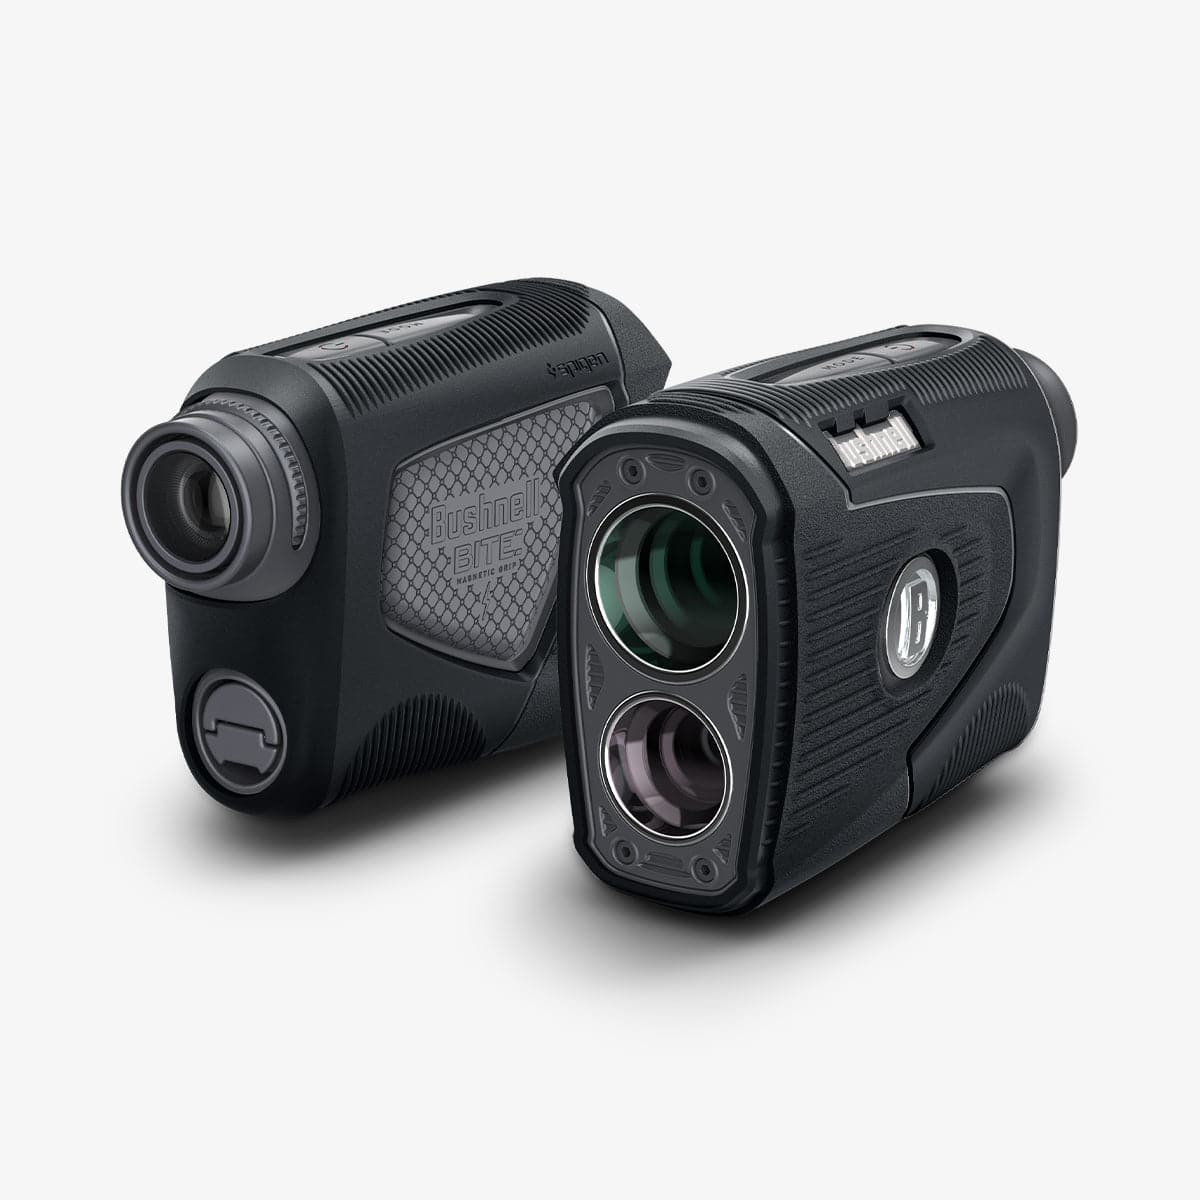 ACS04228 - Bushnell Pro XE Rangefinder AirTag Case in black showing the front, side and back